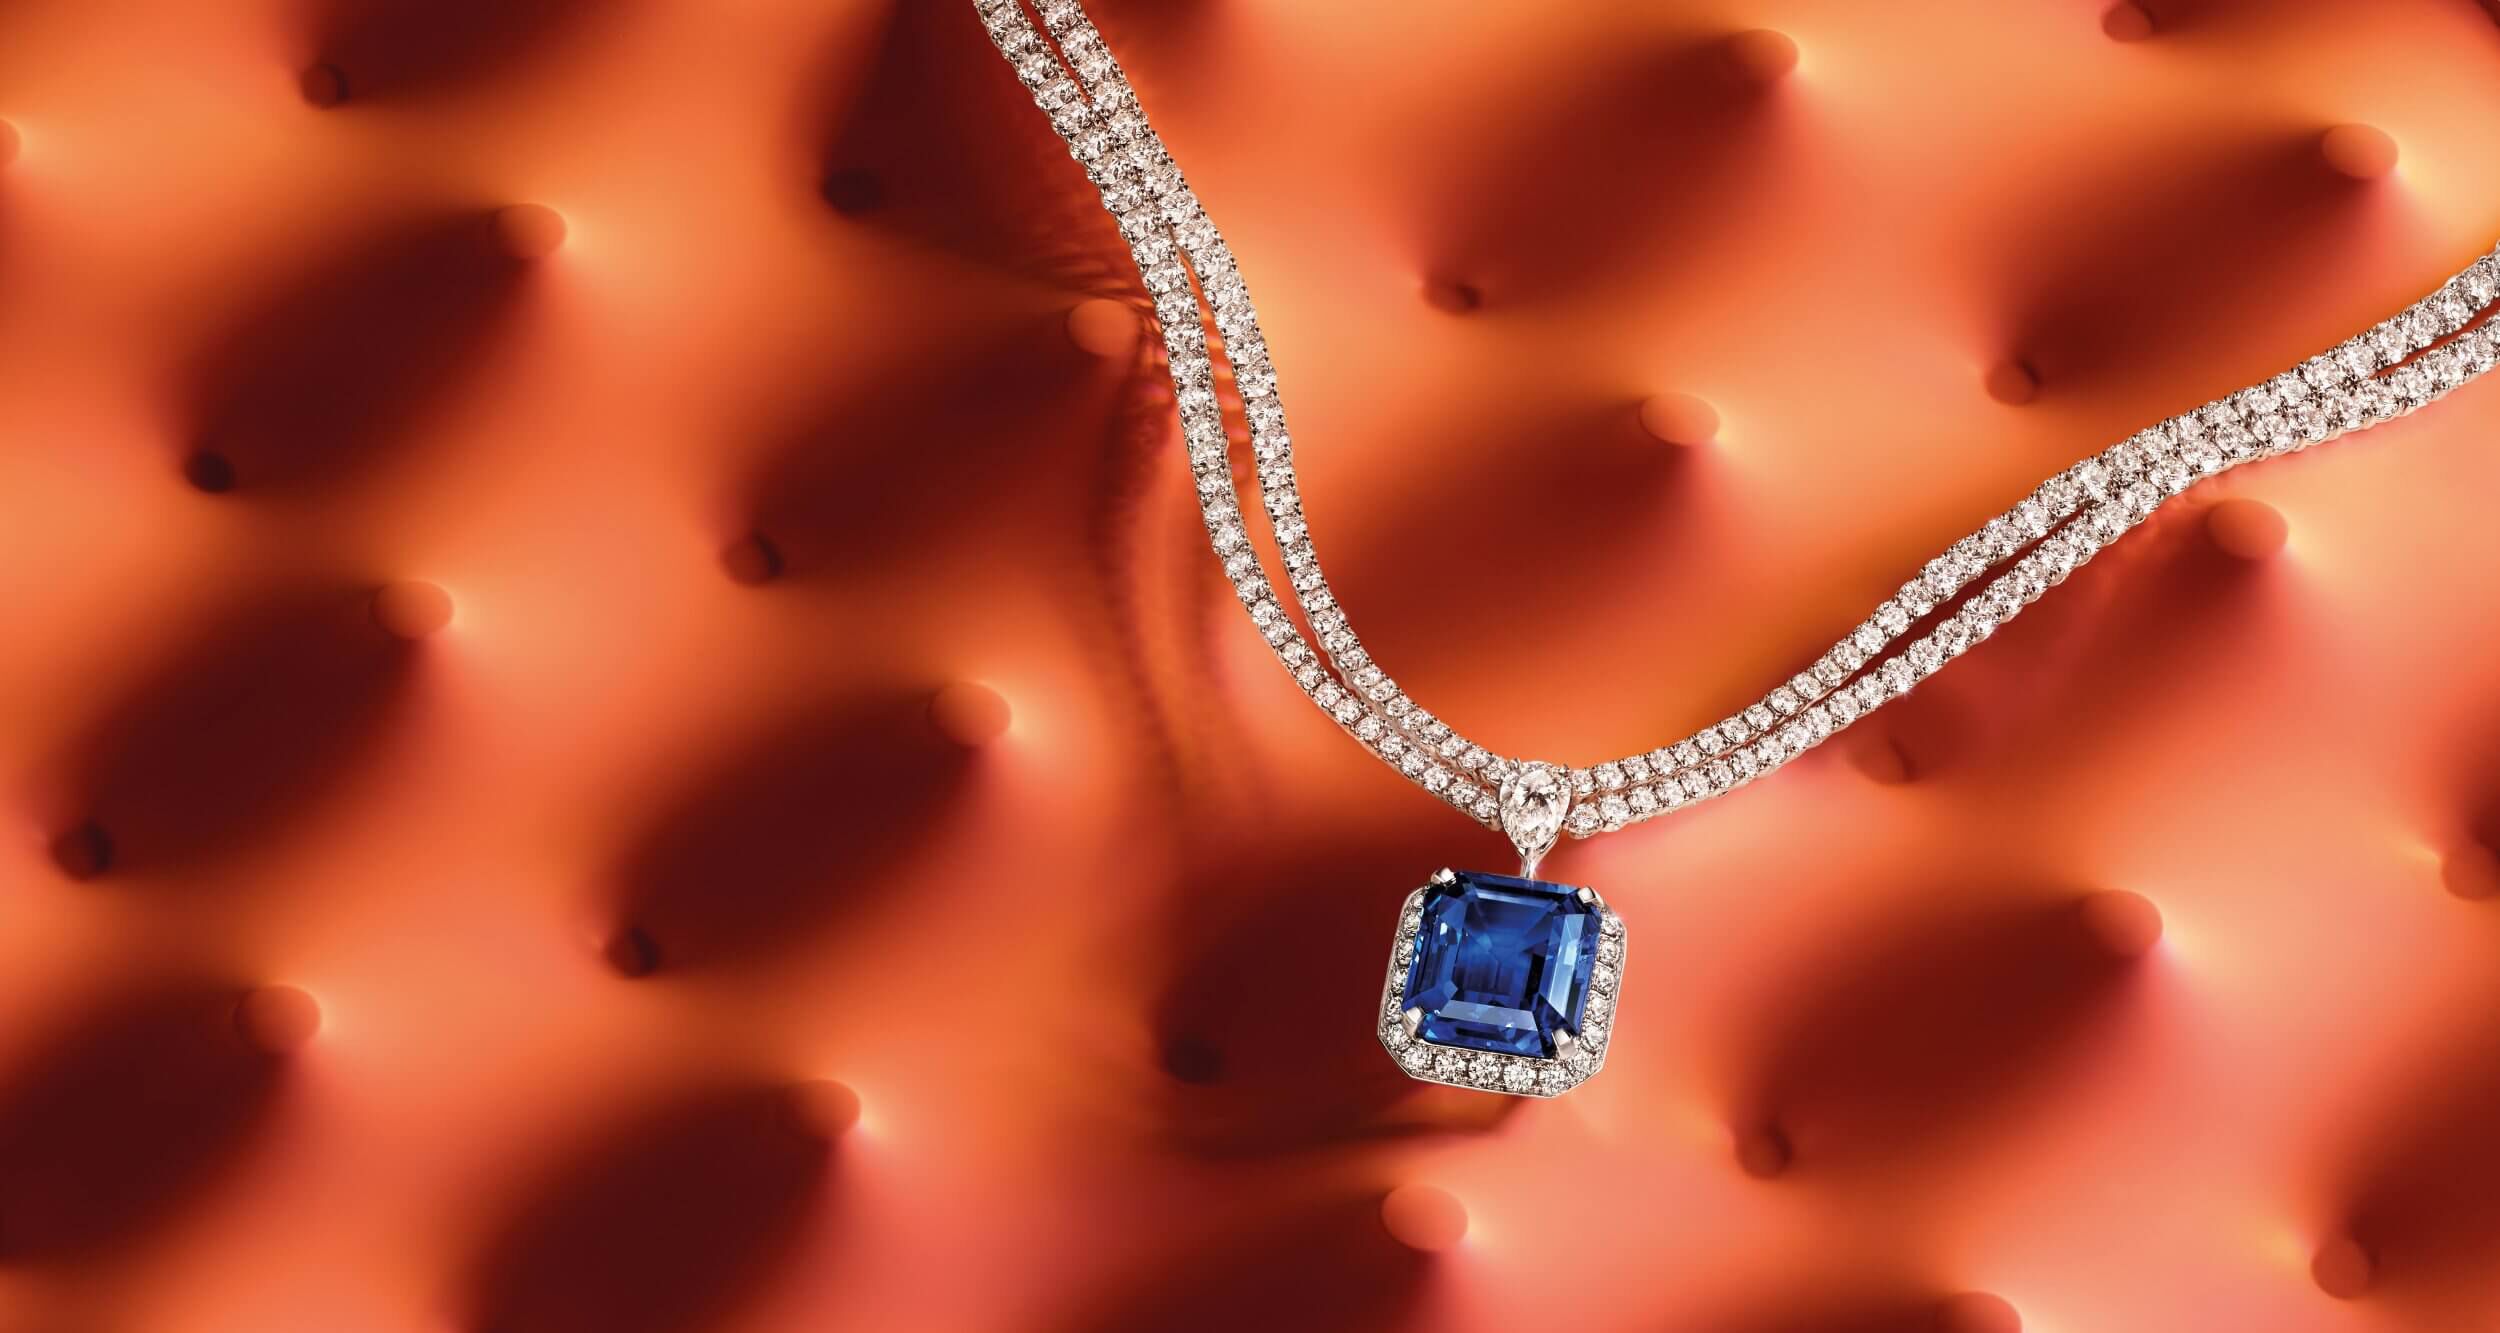 A 17 carat emerald cut sapphire and diamond necklace by Graff on orange texture background